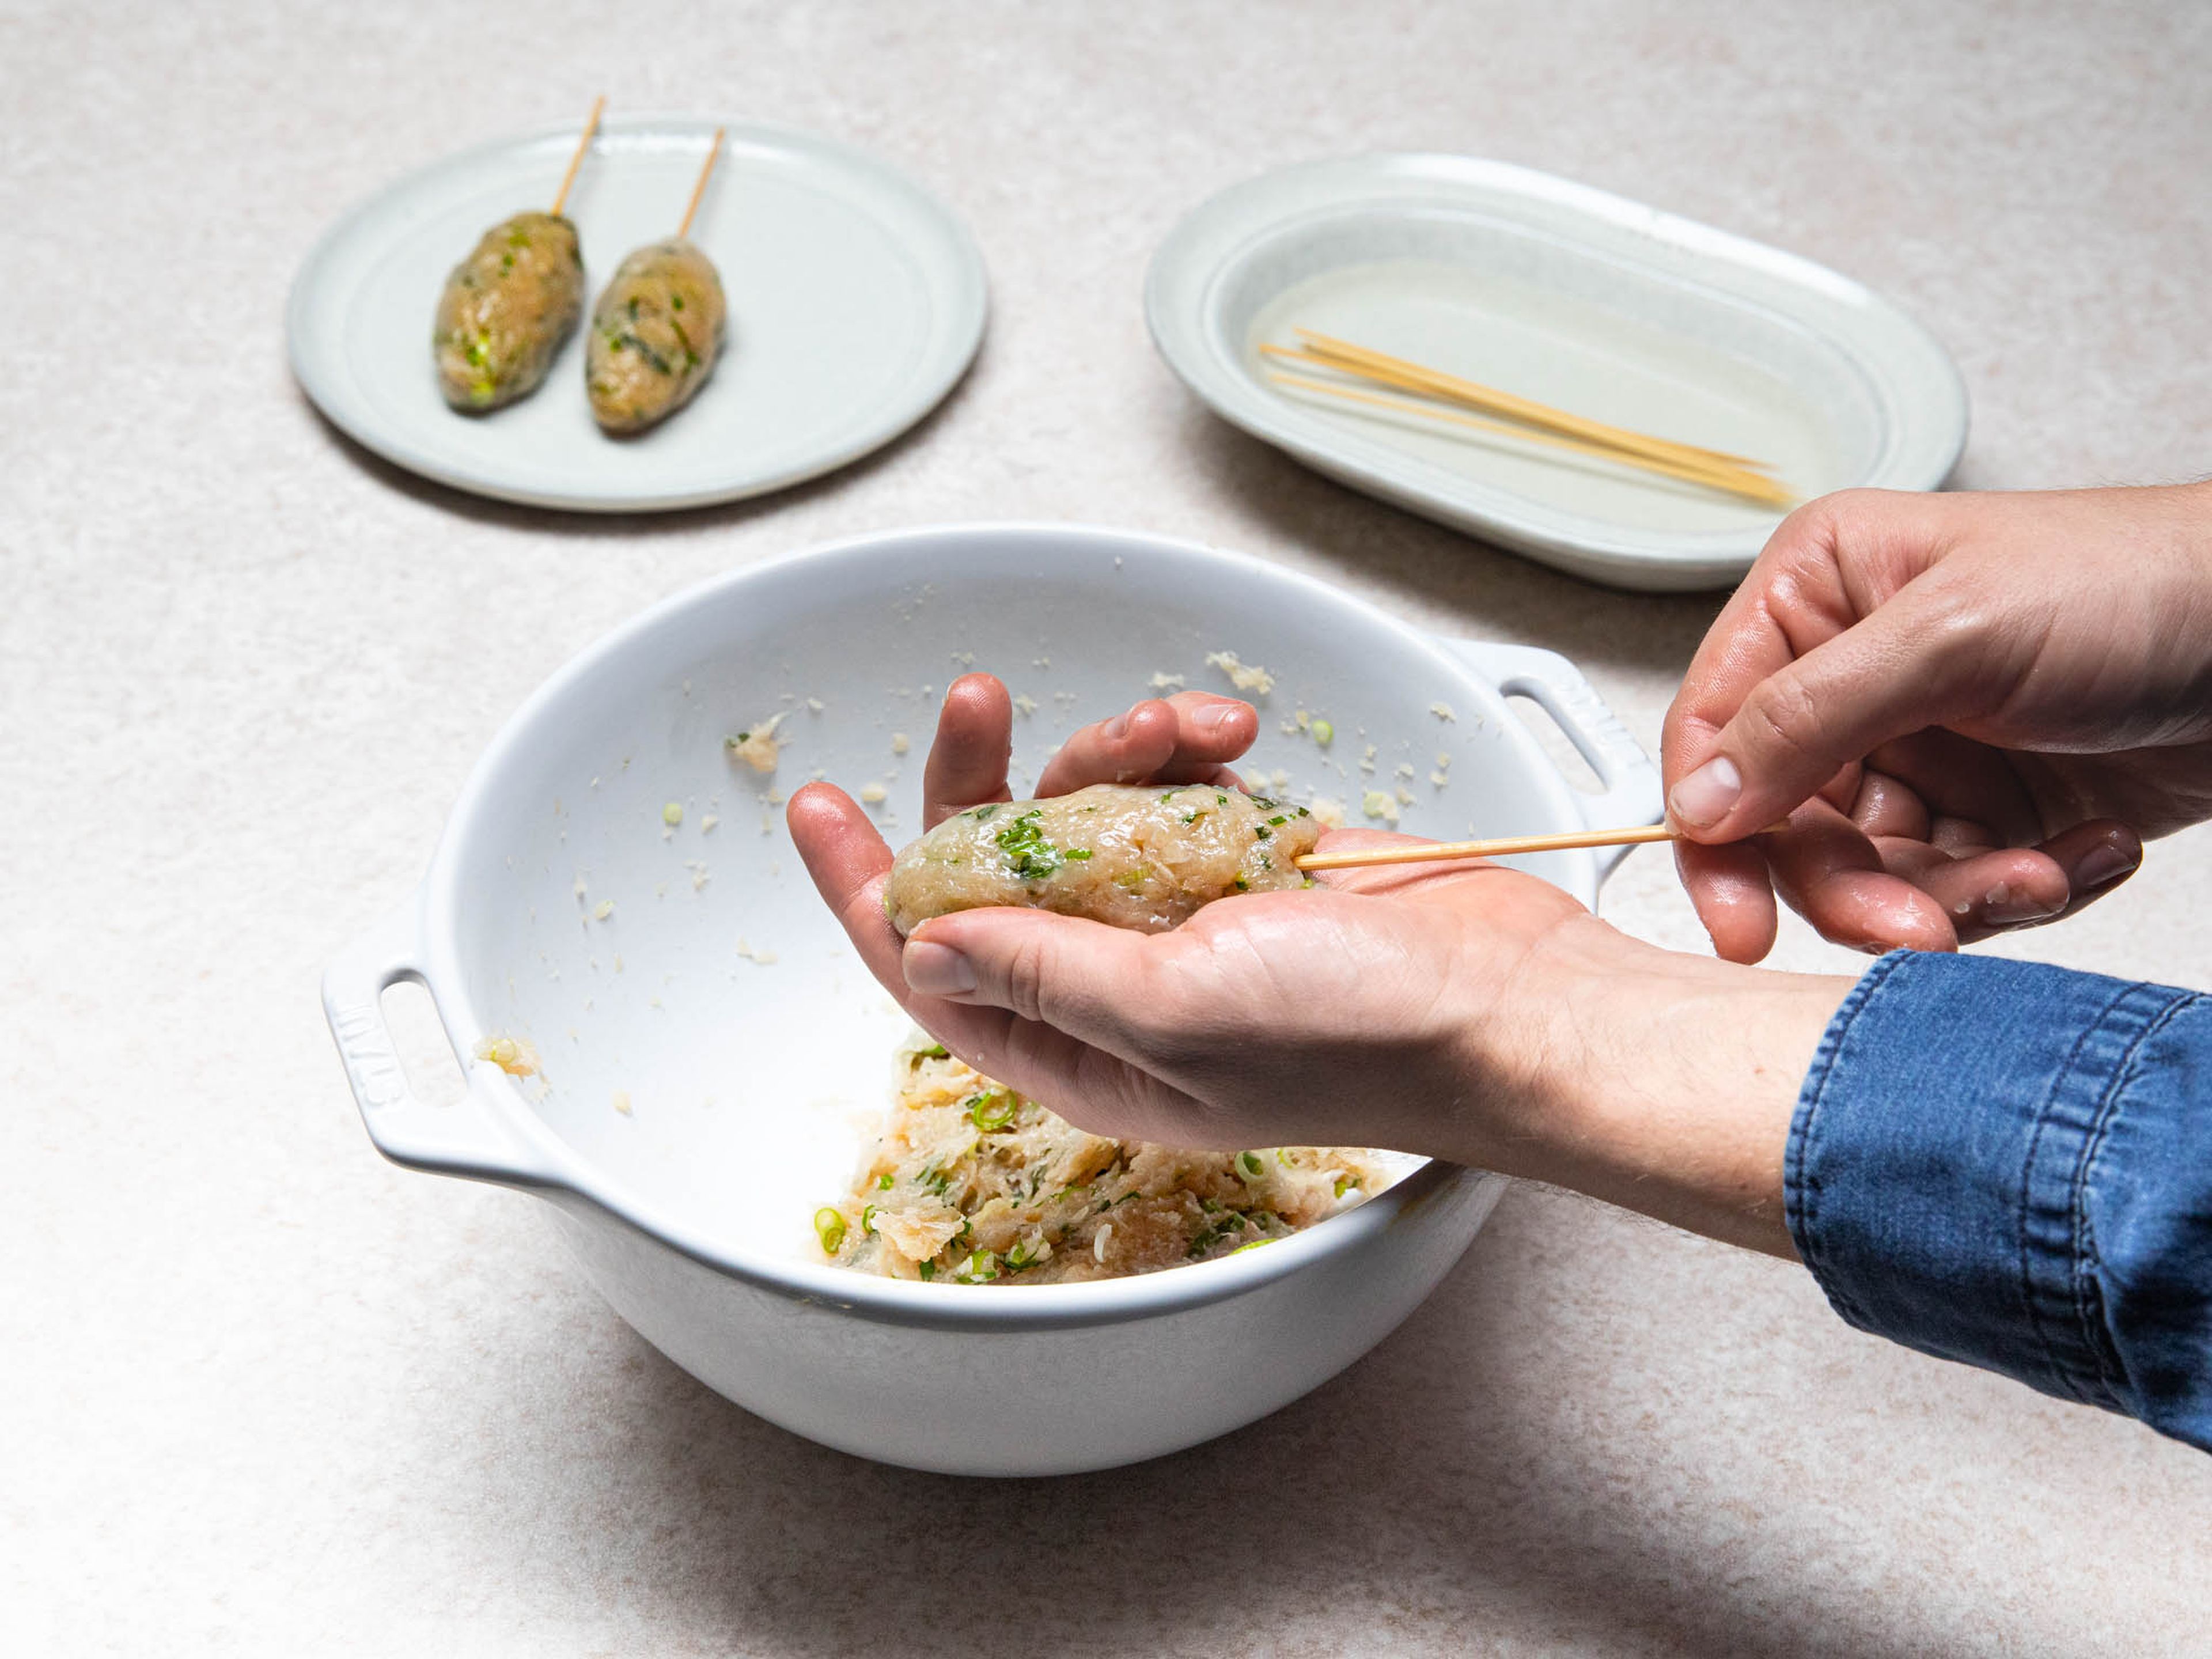 Add chicken, shiso, scallion, miso, and sesame oil to a large bowl. Season with salt and mix to combine. Cover your hands lightly with some sesame oil and shape the meat into a small oval, then skewer with wooden skewers.